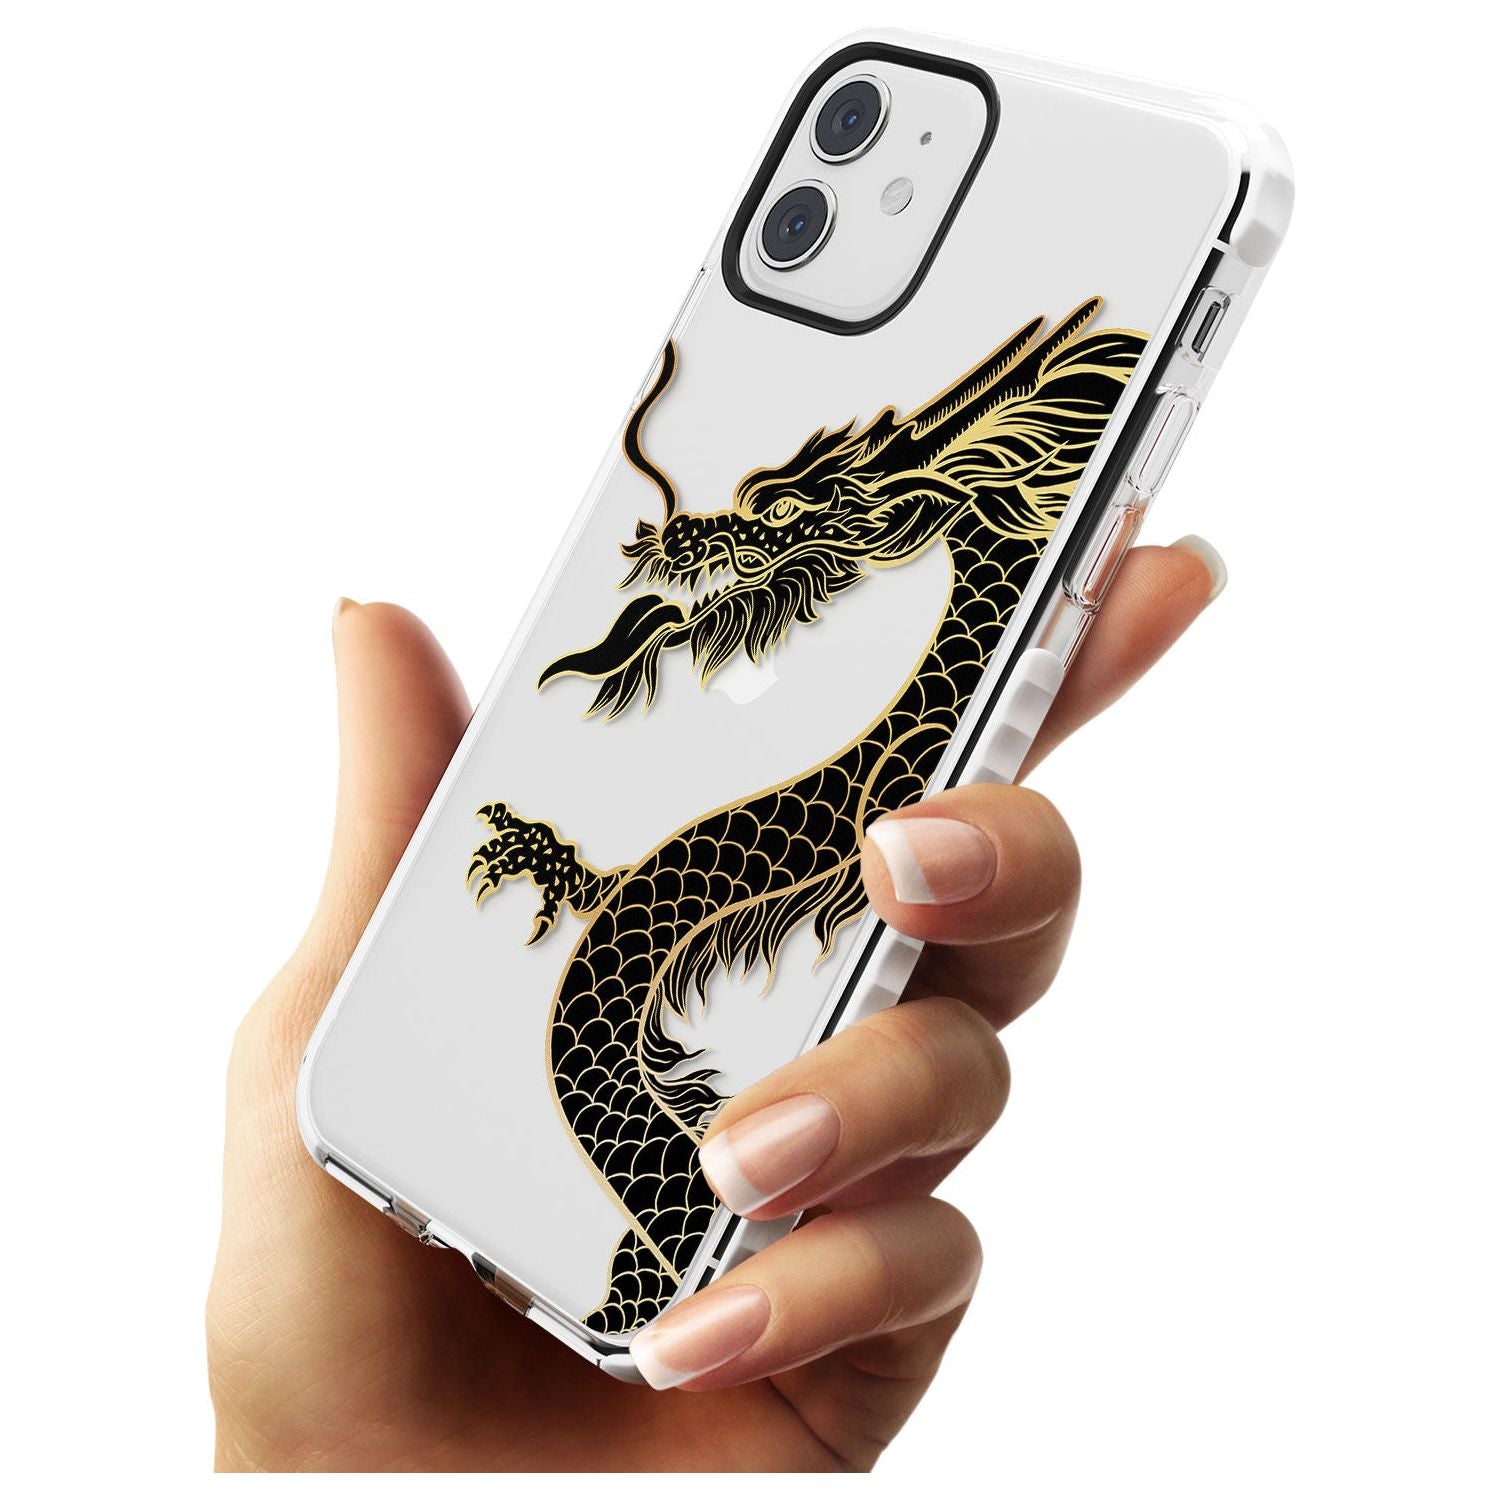 Large Red Dragon Impact Phone Case for iPhone 11